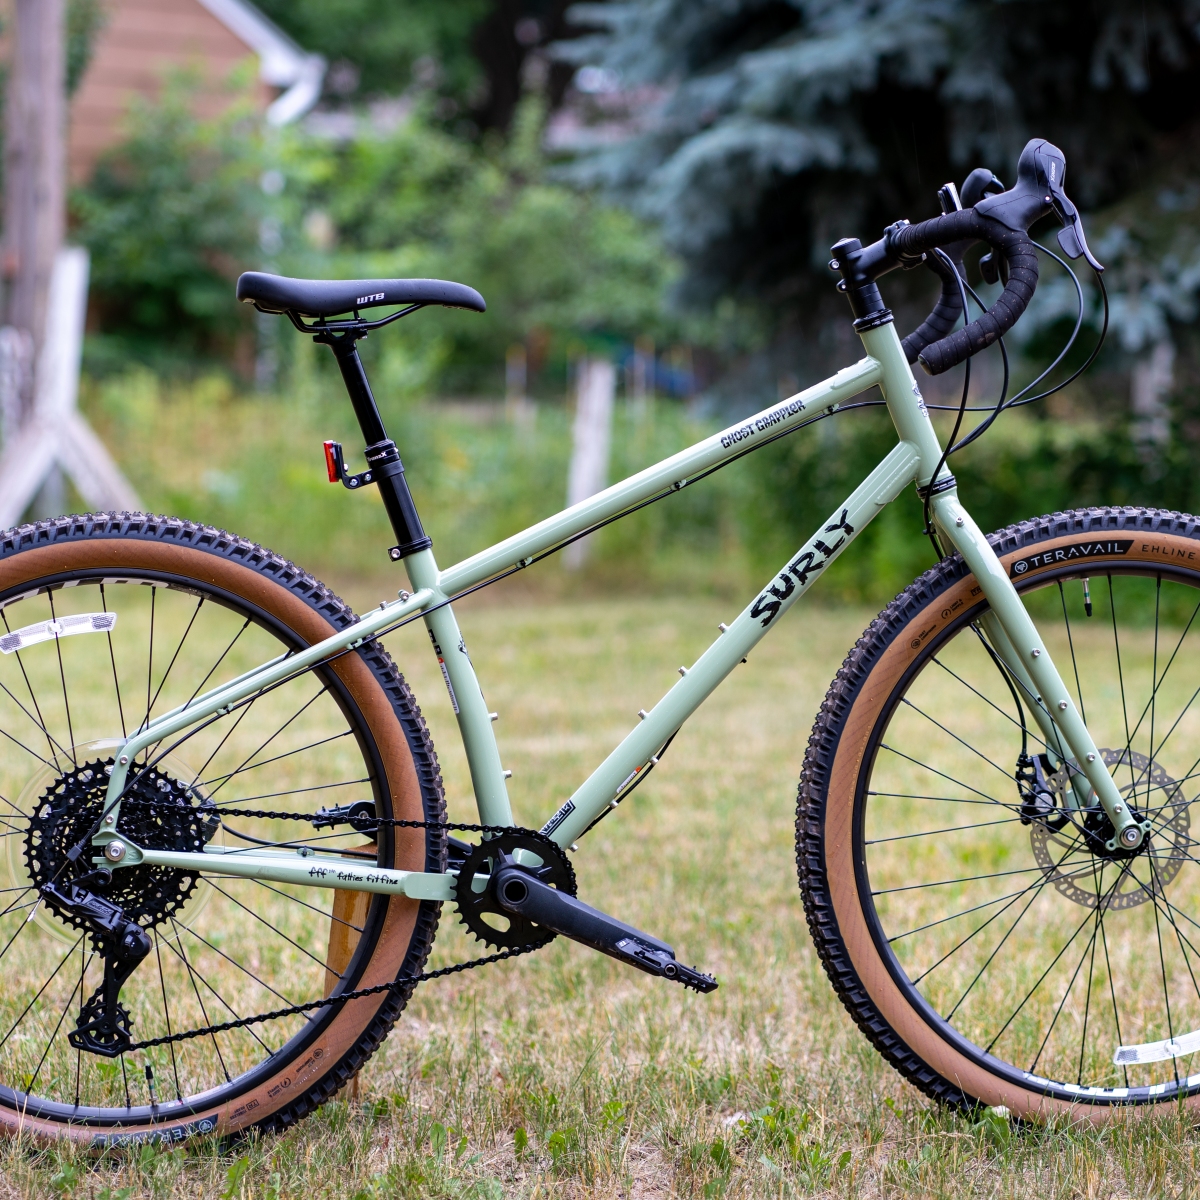 Surly Ghost Grappler – the 400 mile review